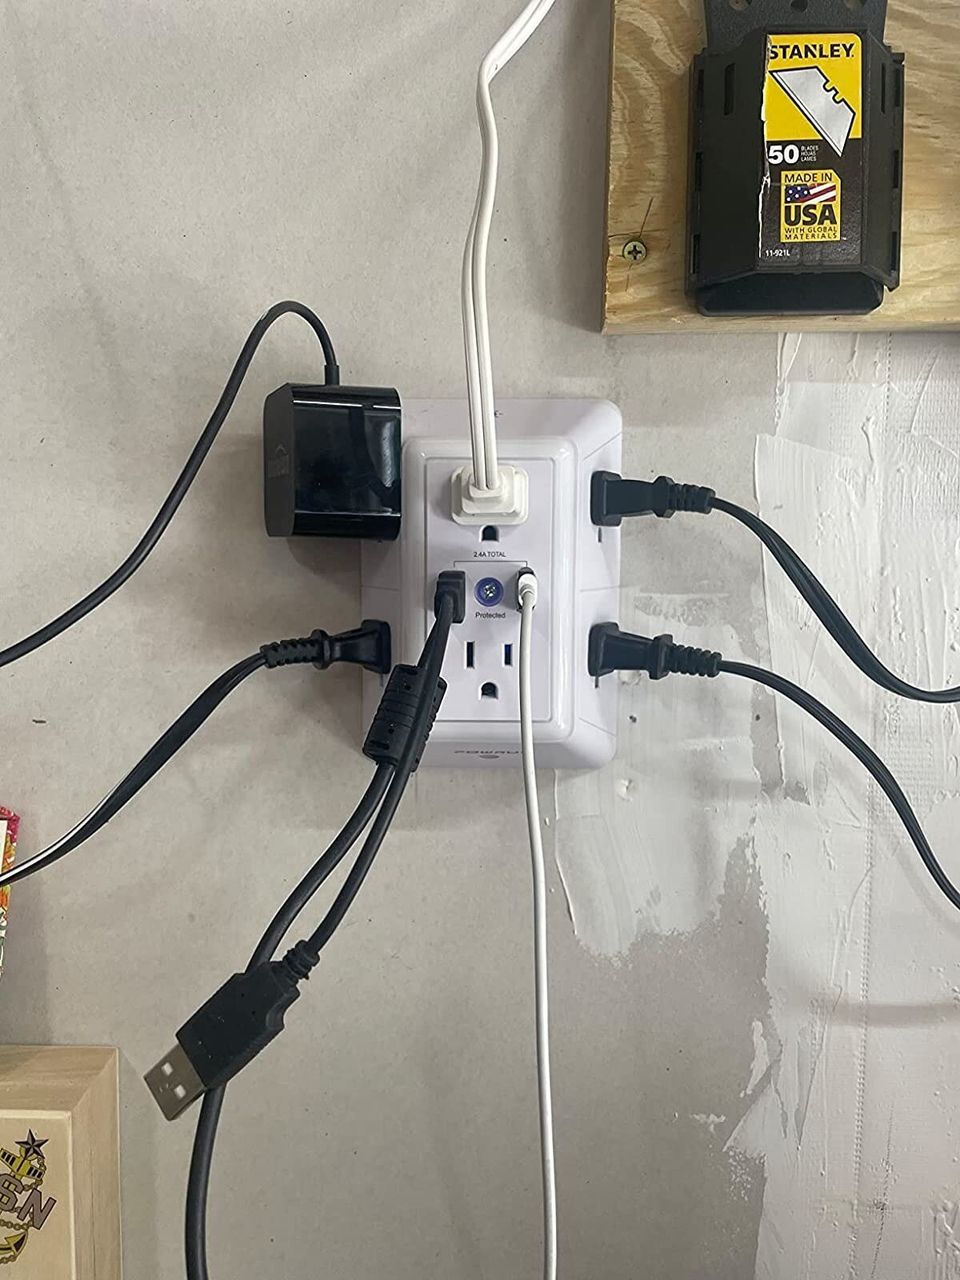 A six-plug outlet with two USB ports